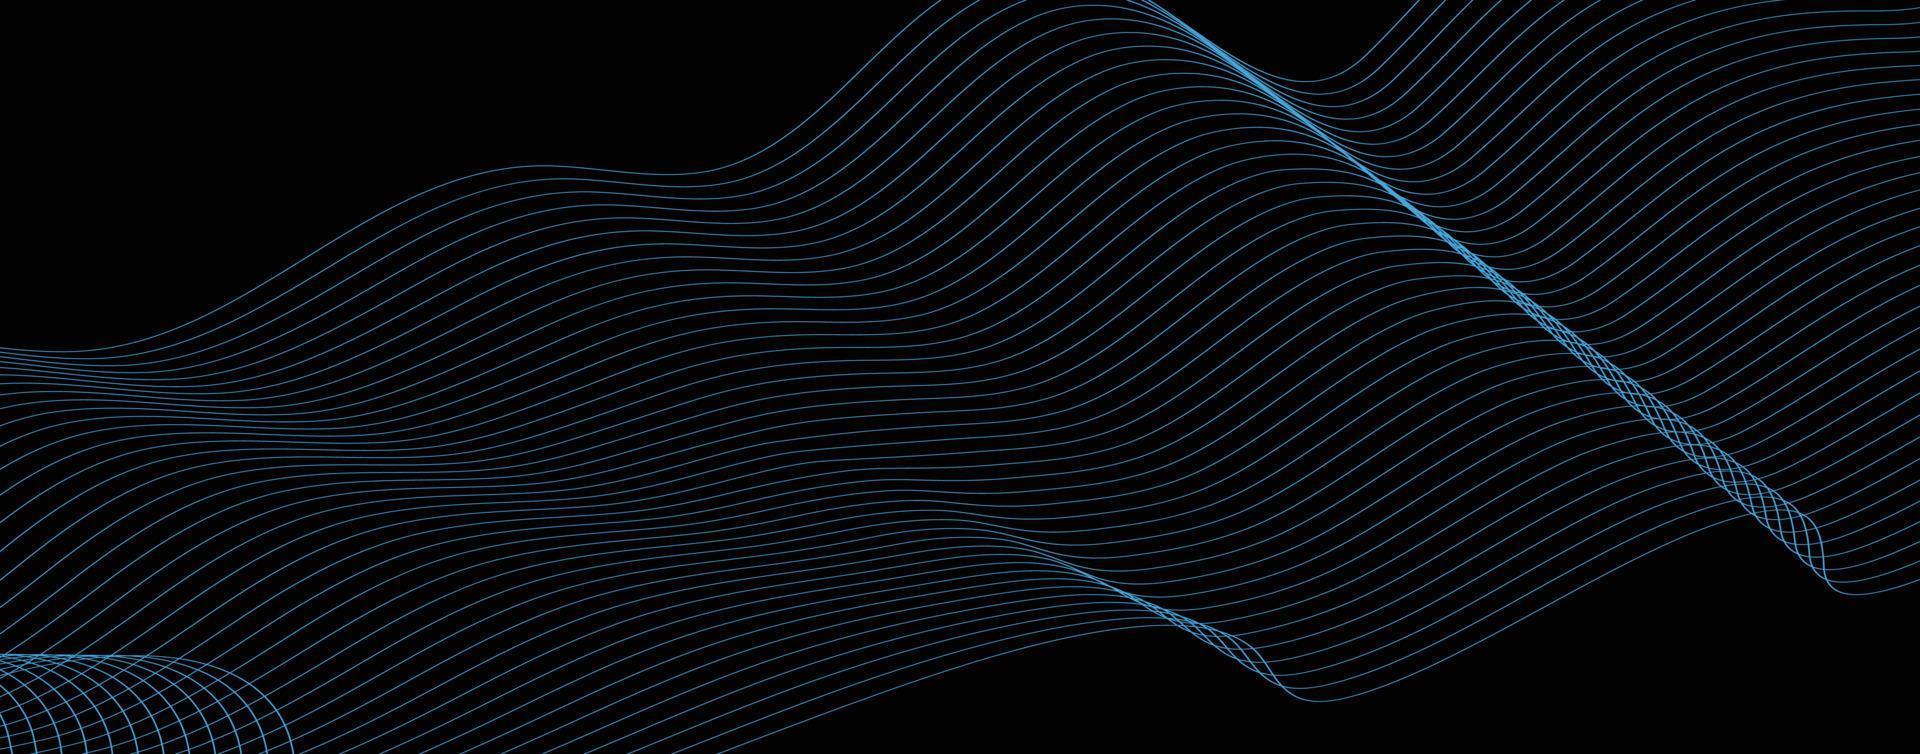 Abstract wave element for design. Digital frequency track equalizer. Stylized line art background vector